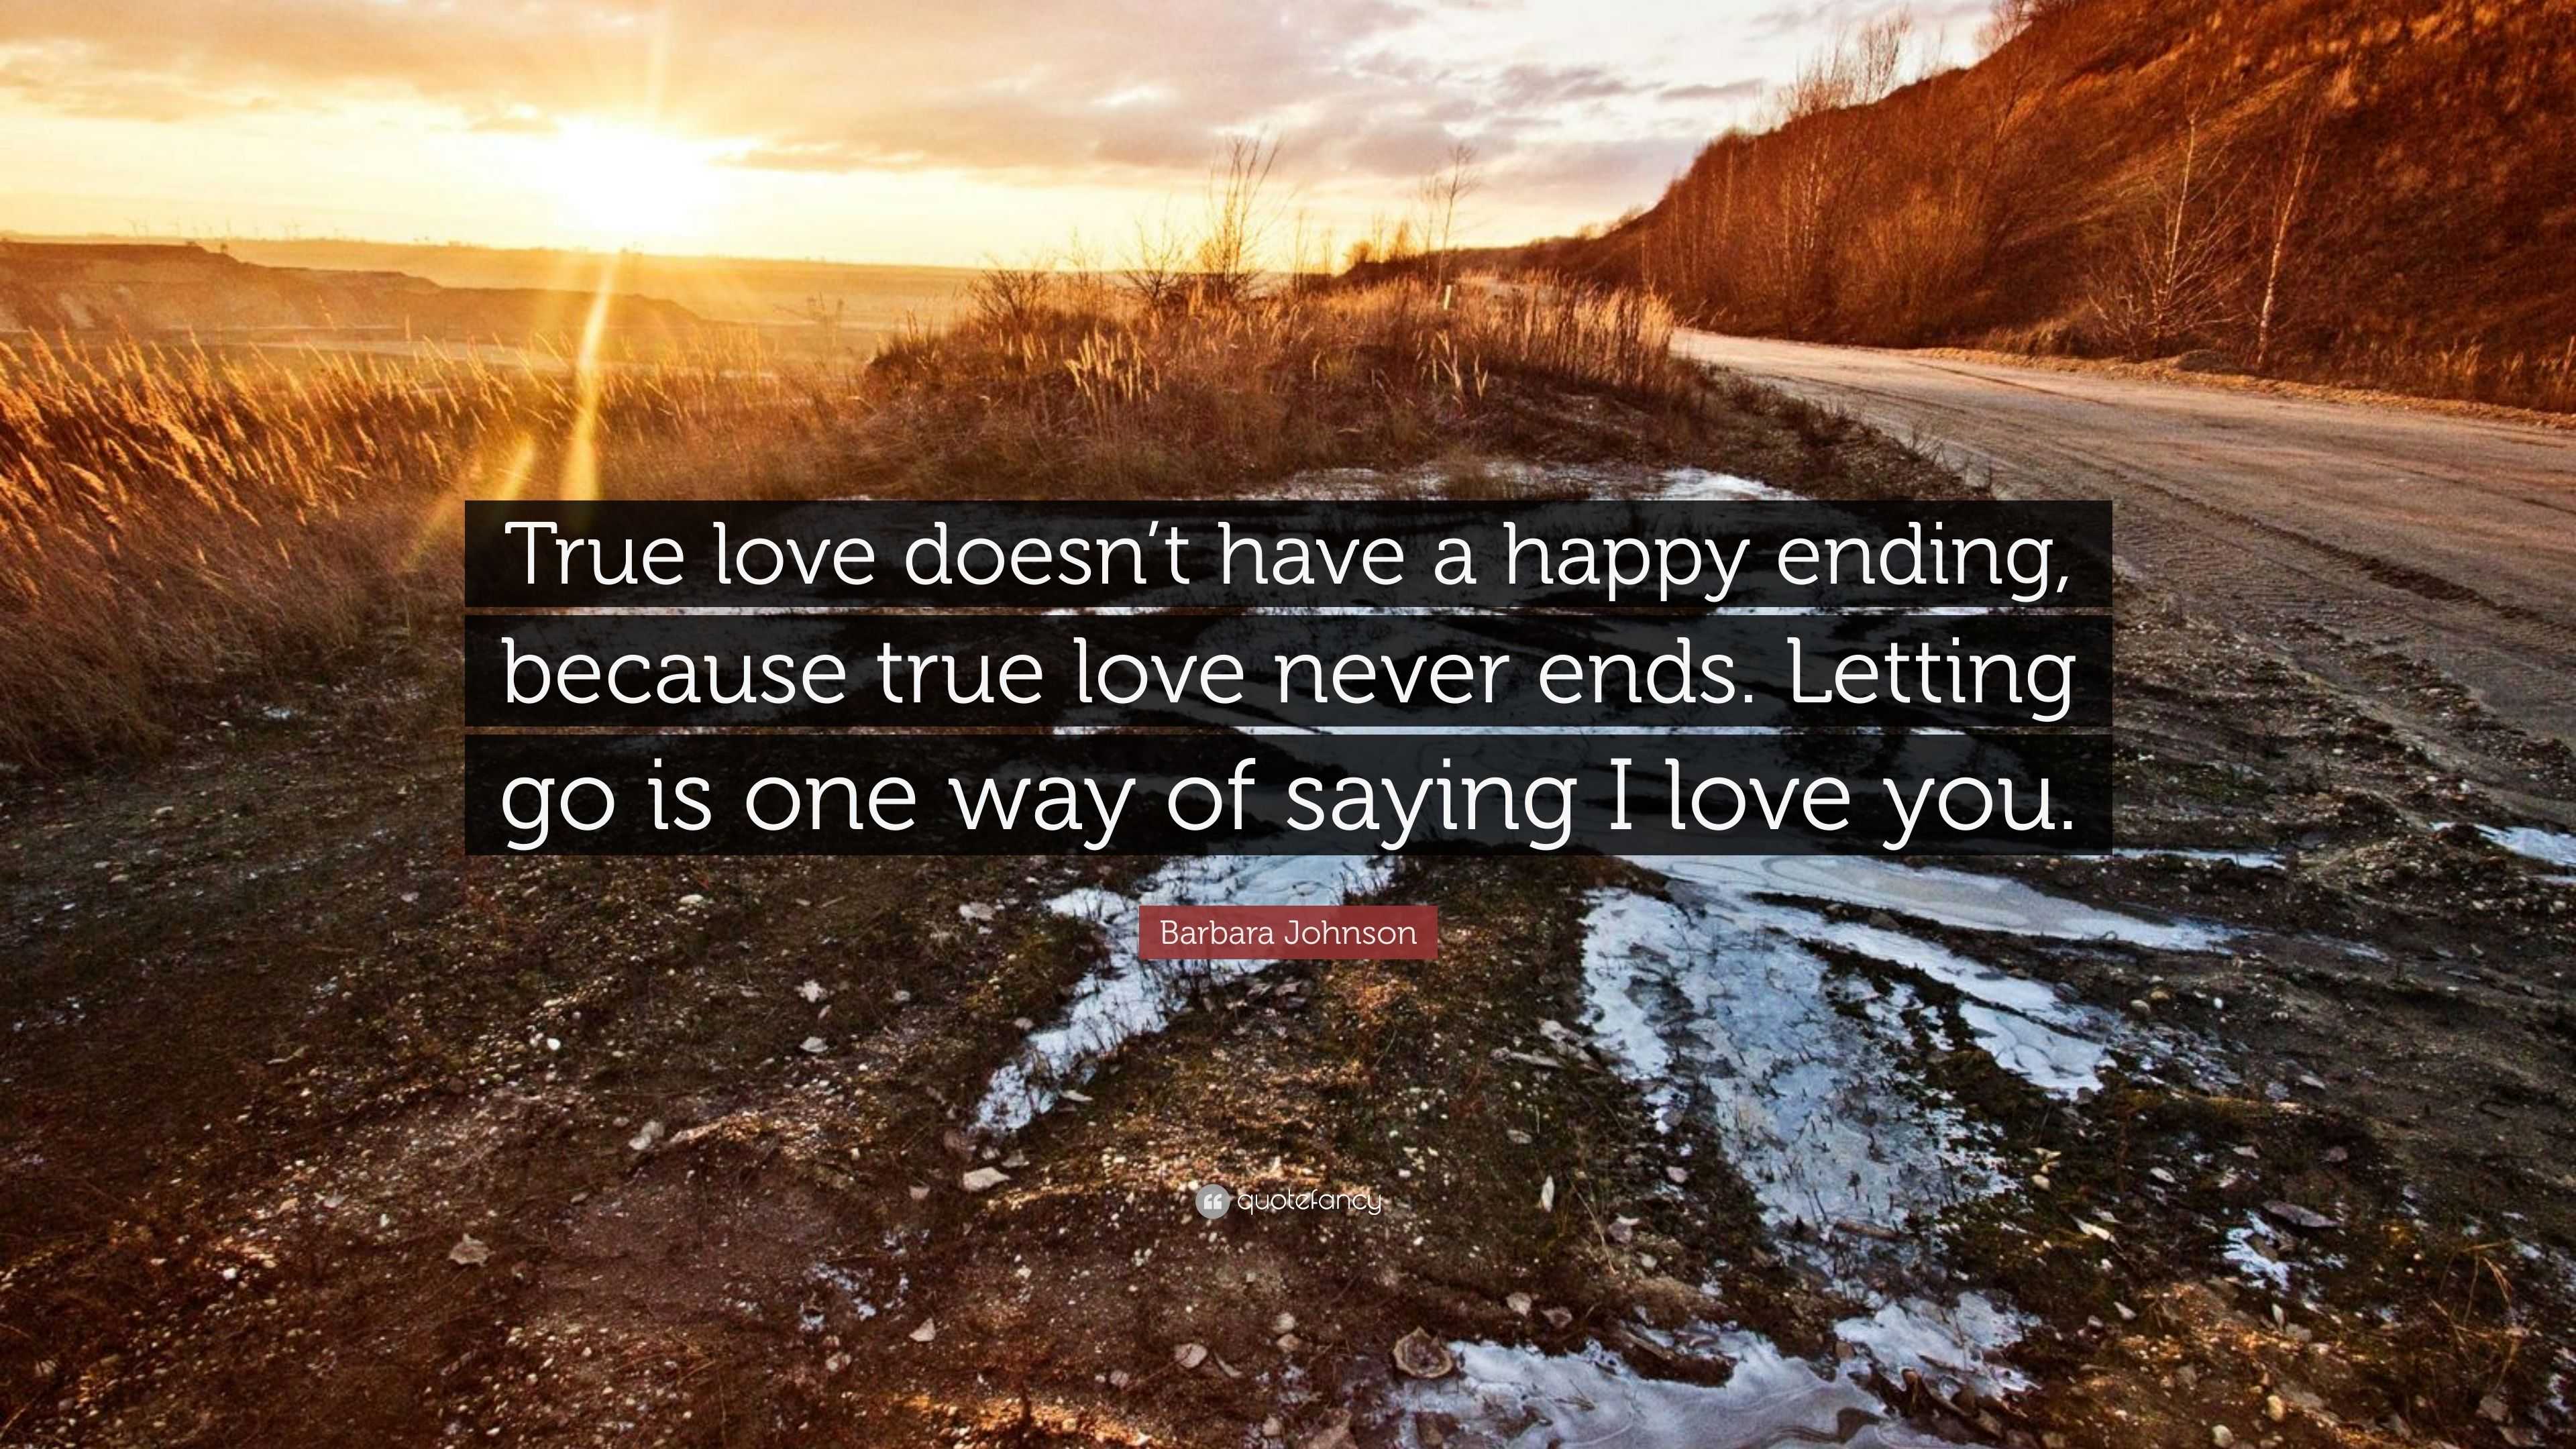 Barbara Johnson Quote “True love doesn’t have a happy ending, because